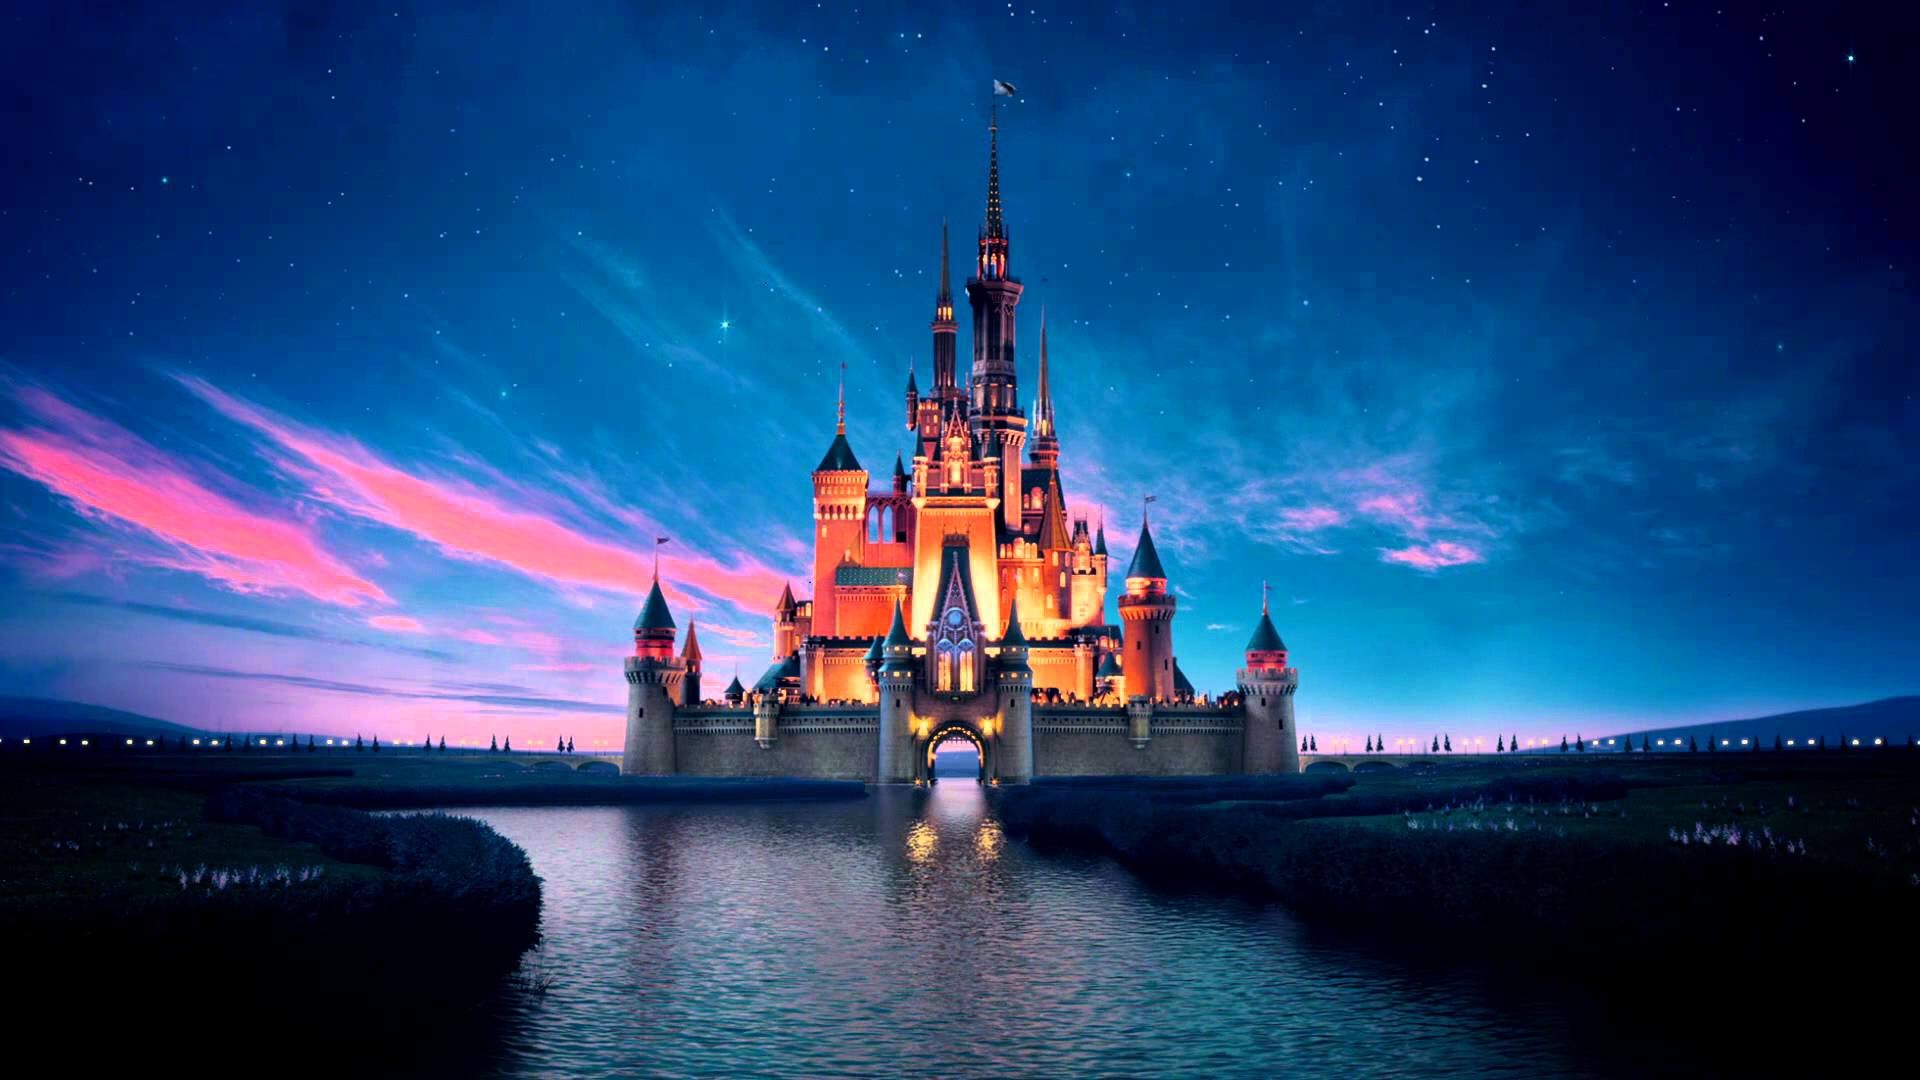 1920x1080 HD Quality Disney Wallpapers Widescreen, DH.11